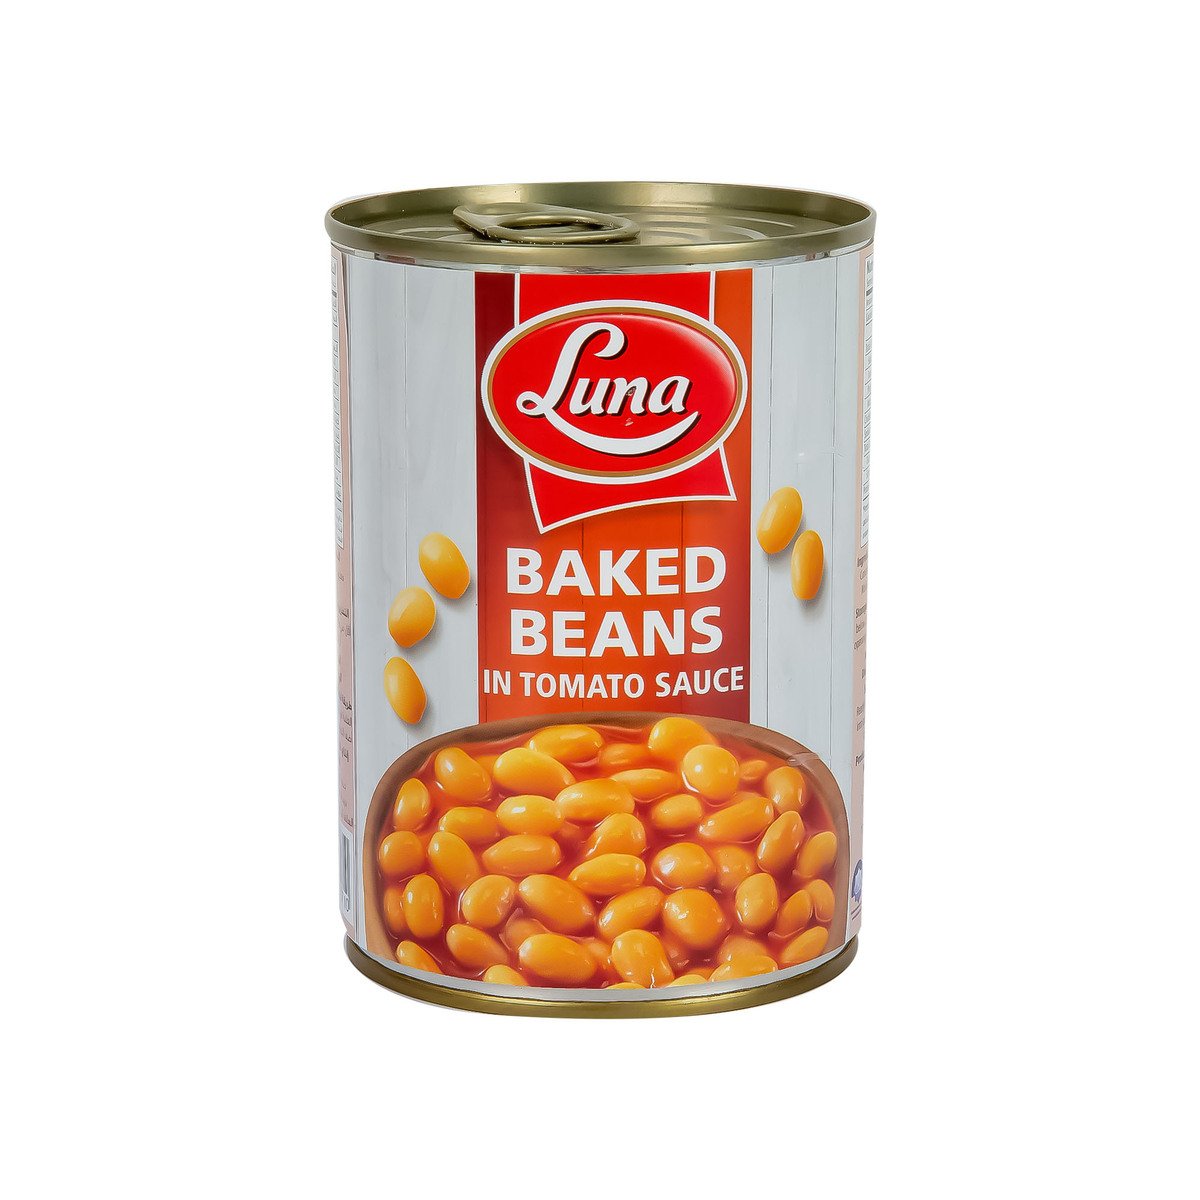 Buy Luna Baked Beans In Tomato Sauce 380 g Online at Best Price | Canned Baked Beans | Lulu UAE in Saudi Arabia